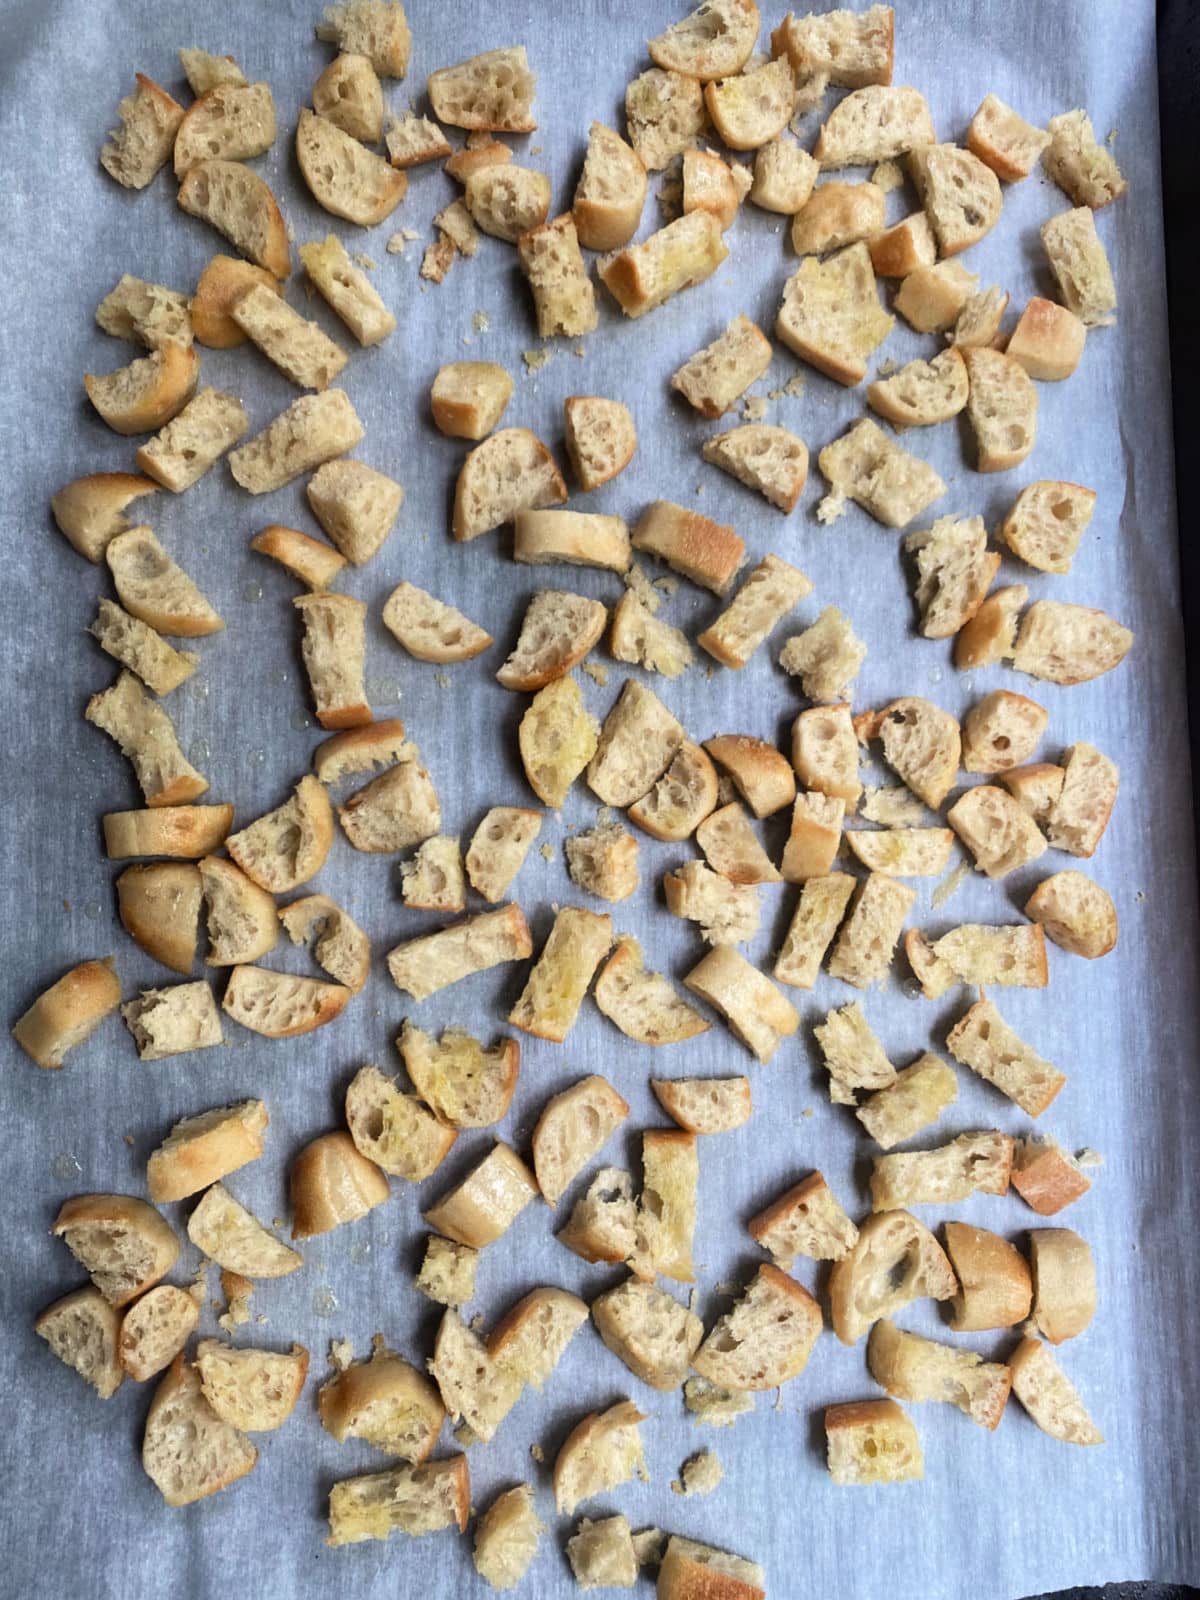 French bread cut into crouton on a baking sheet
